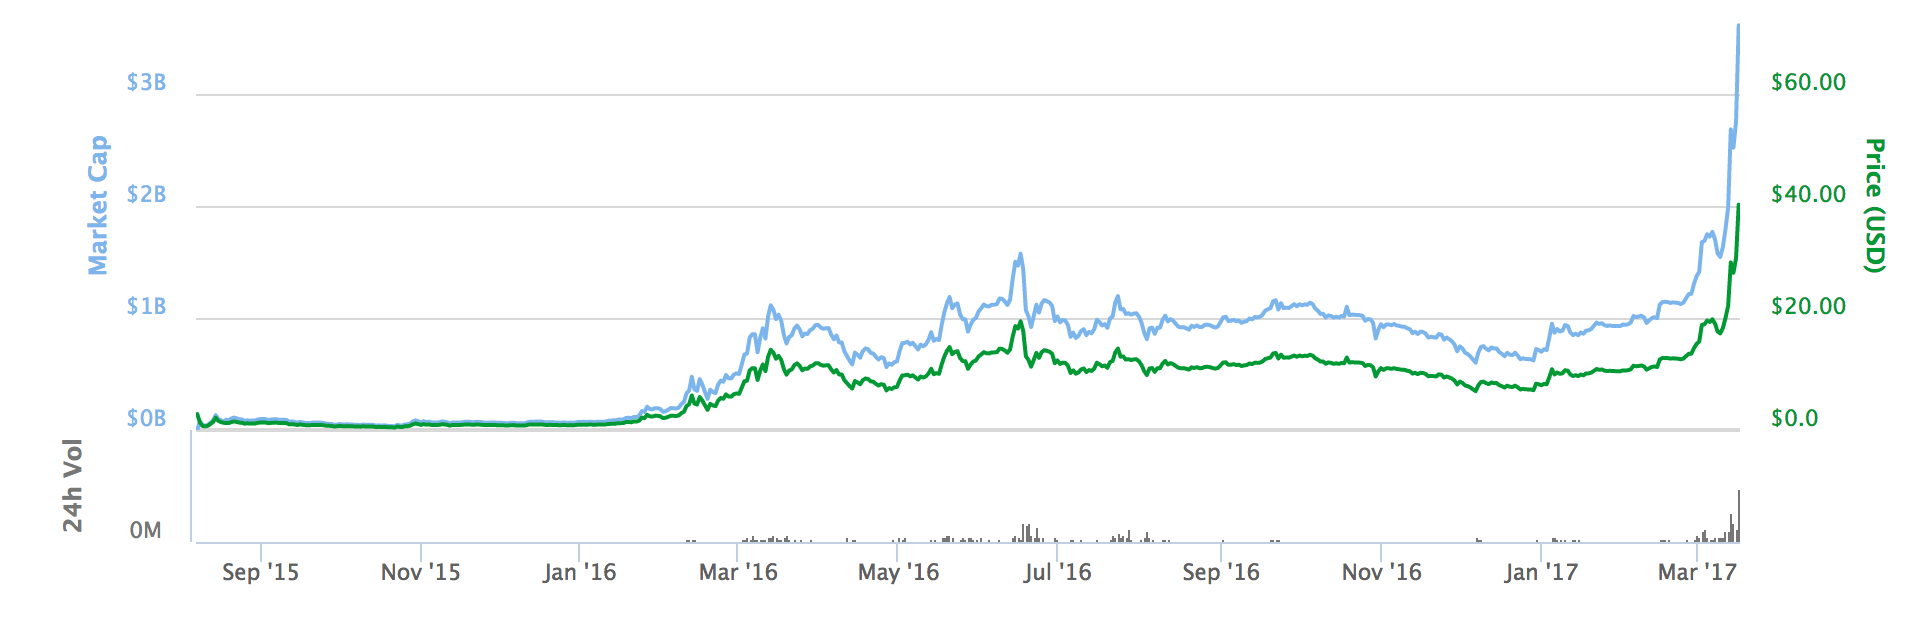 Ether Price Tear Continues With New All-Time High